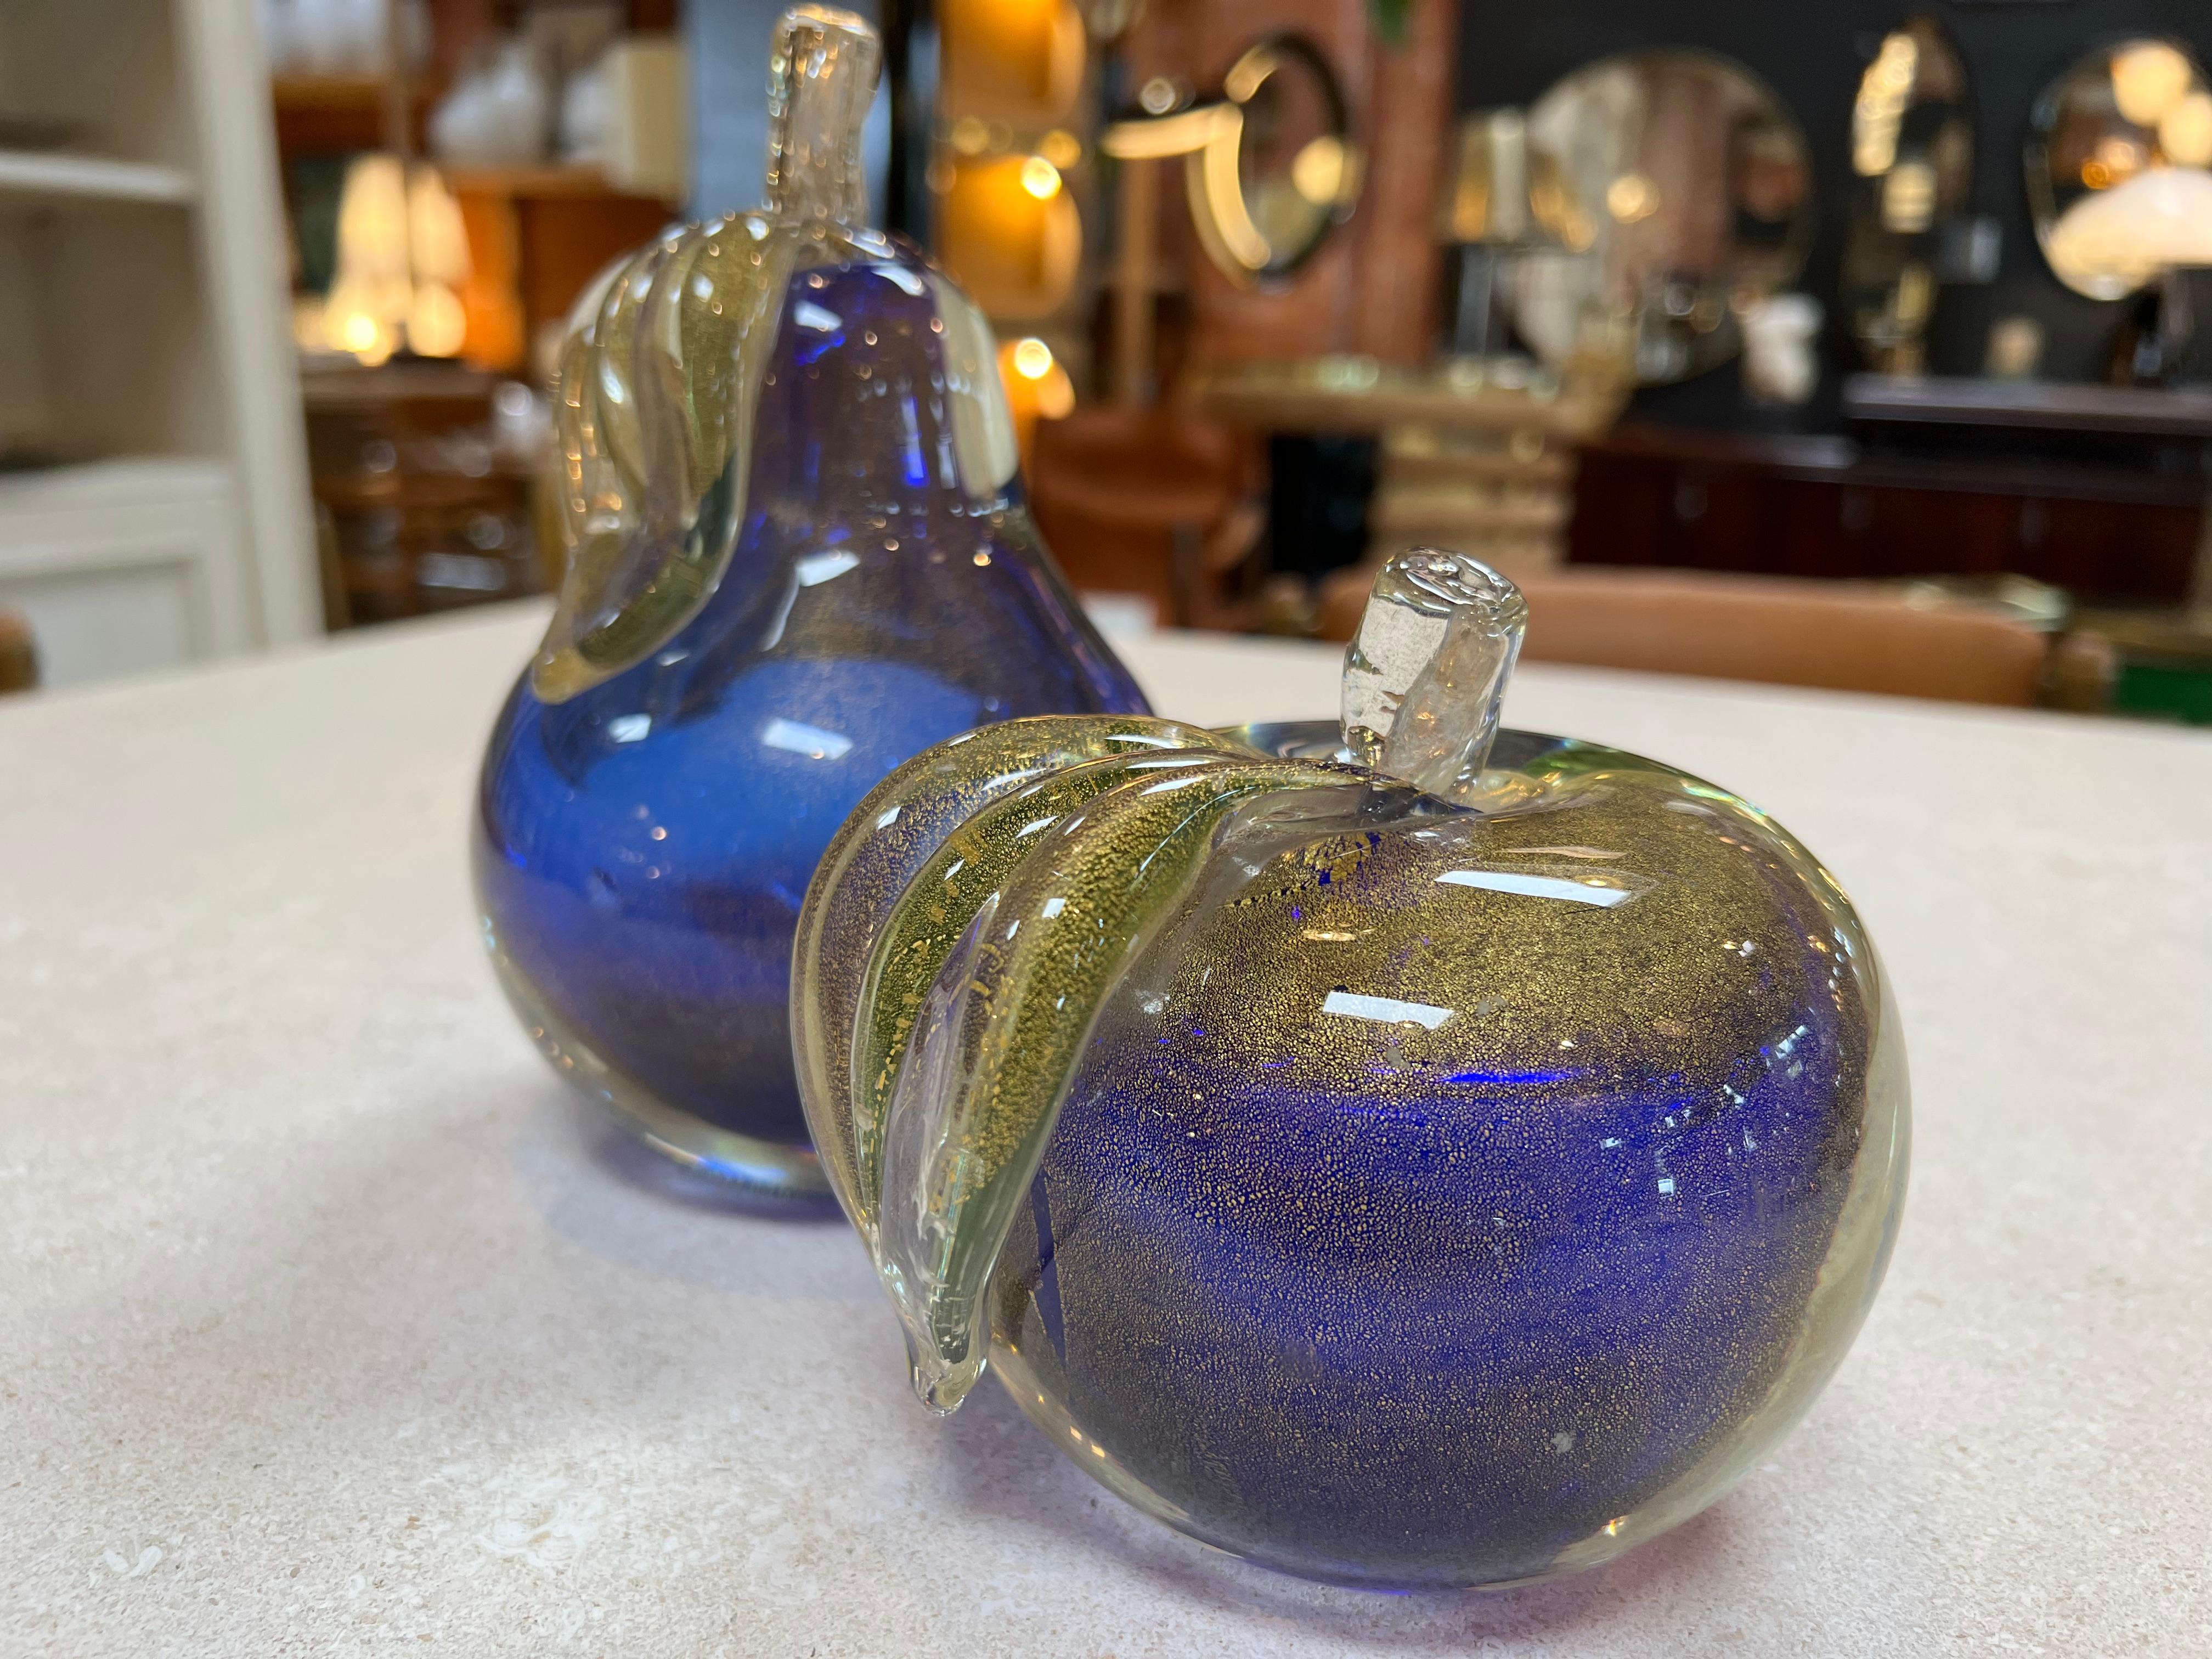 Behold the captivating duo of exquisite decorative objects crafted from the finest blue Murano glass. This enchanting set features two charming apple figurines and one elegant pear sculpture, each meticulously hand-blown to perfection. The radiant